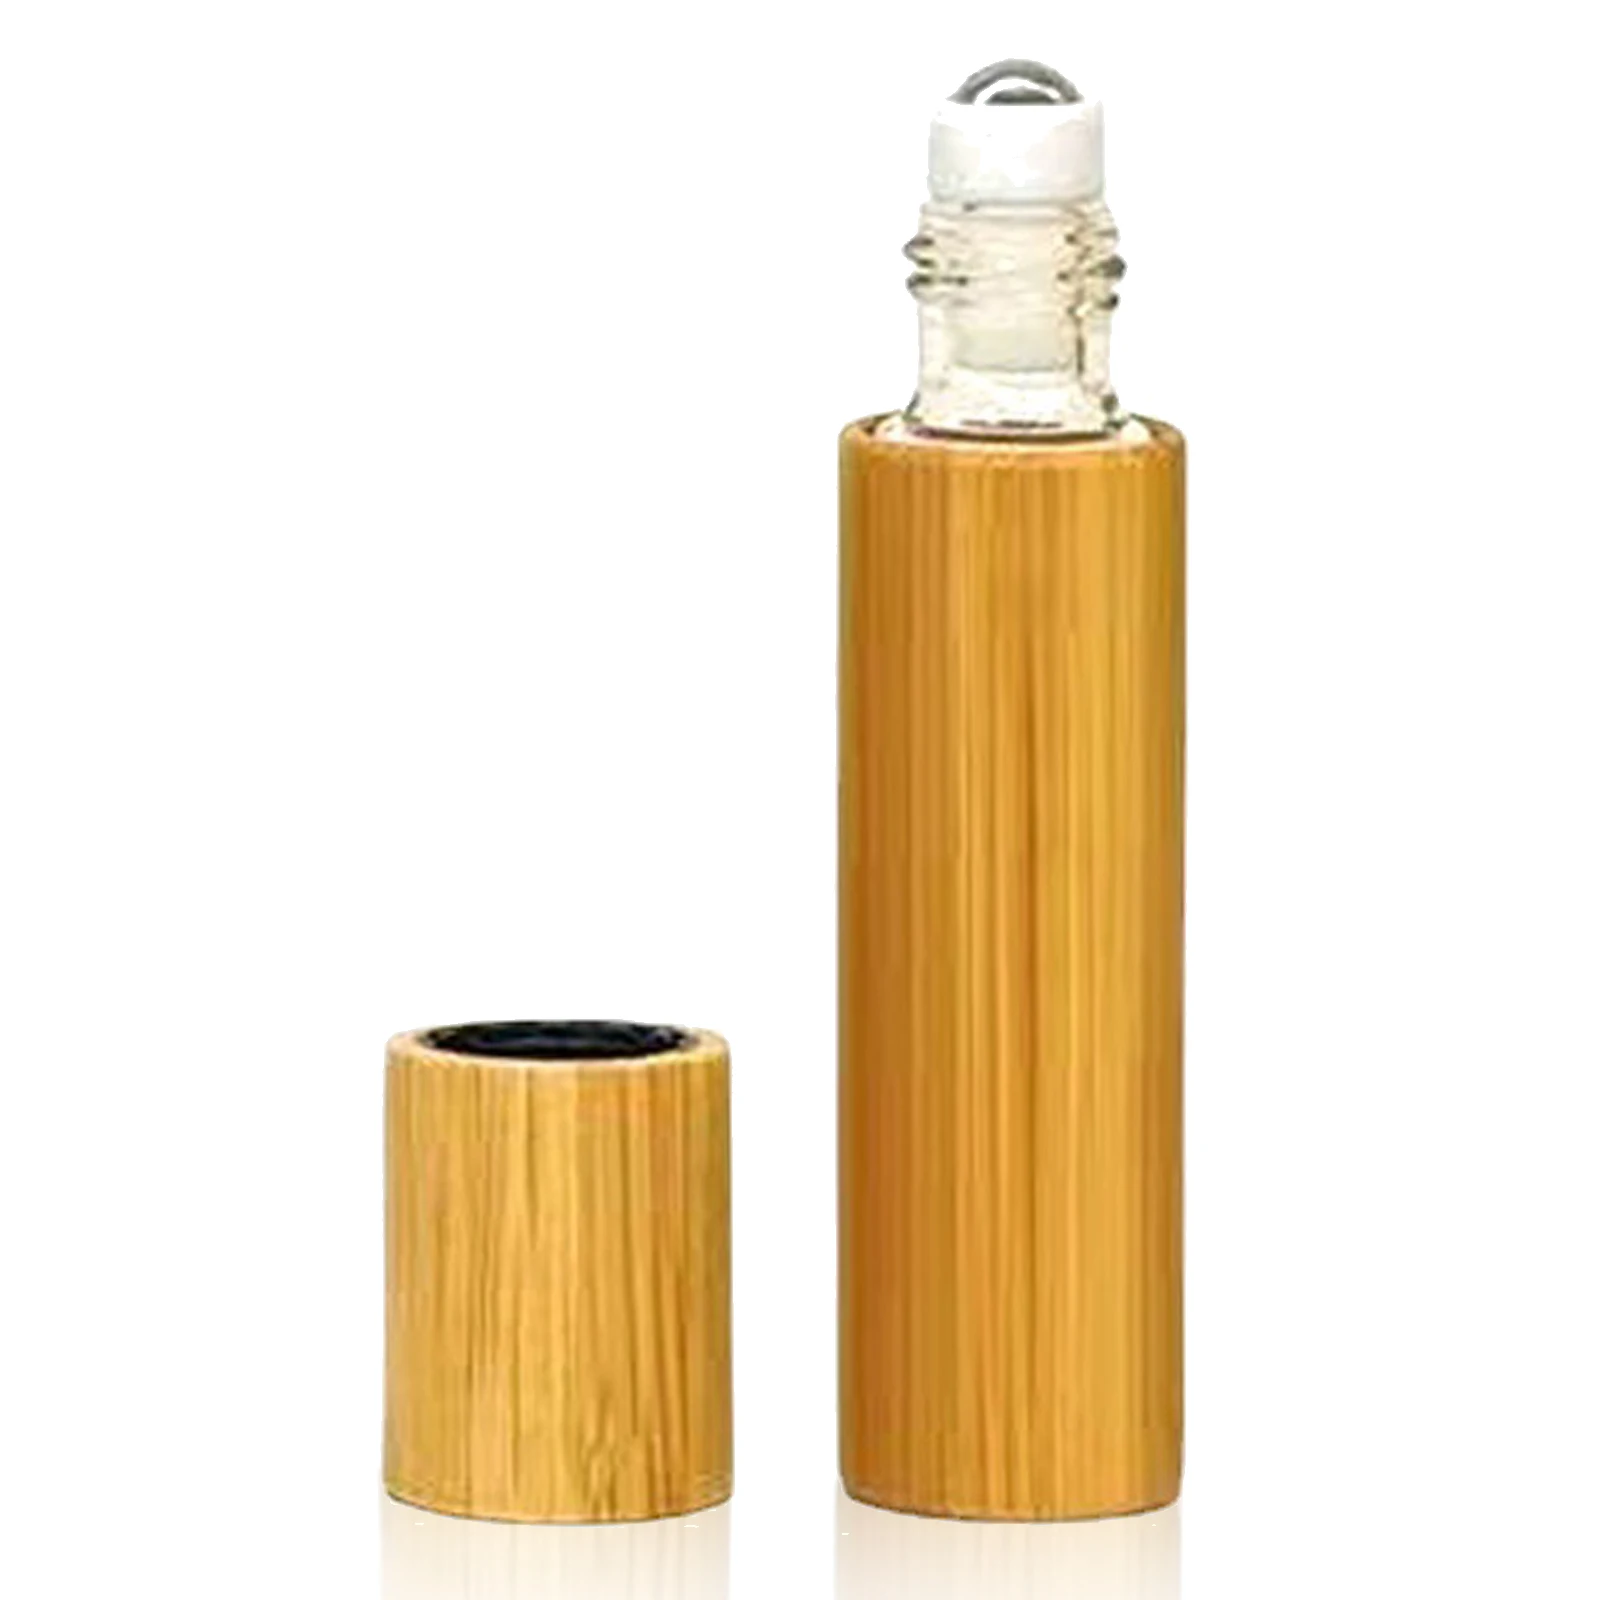 1ml 2ml 3ml 5ml 10ml  refillable bamboo roll on bottle essential oil clear glass roller bottle with bamboo cap H69ce18f74d0b4ae0b2e6616a00a11ac8r